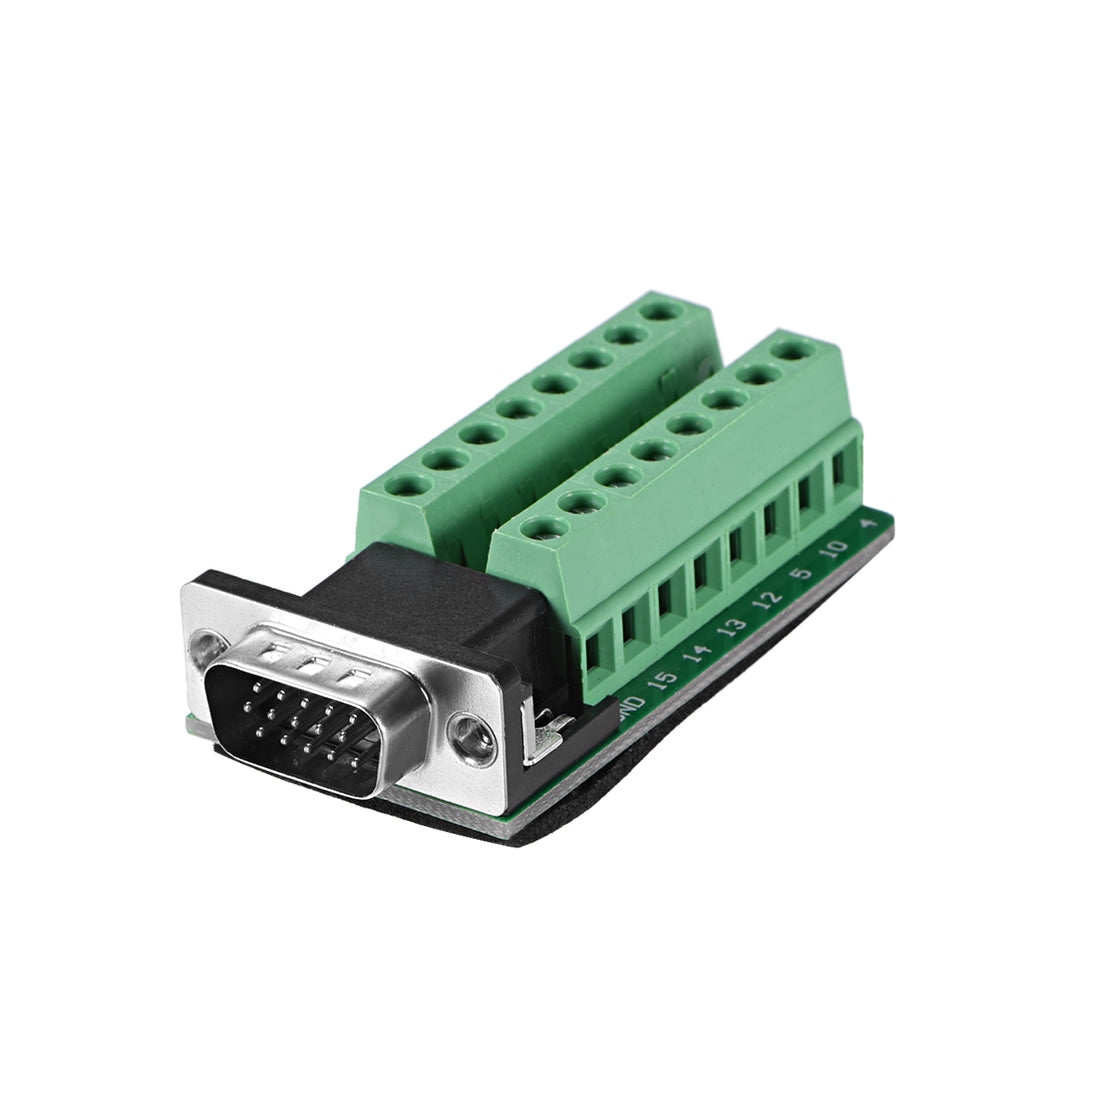 uxcell Uxcell D-sub DB15 Breakout Board Connector 15 Pin 3-row Male Port Solderless Terminal Block Adapter